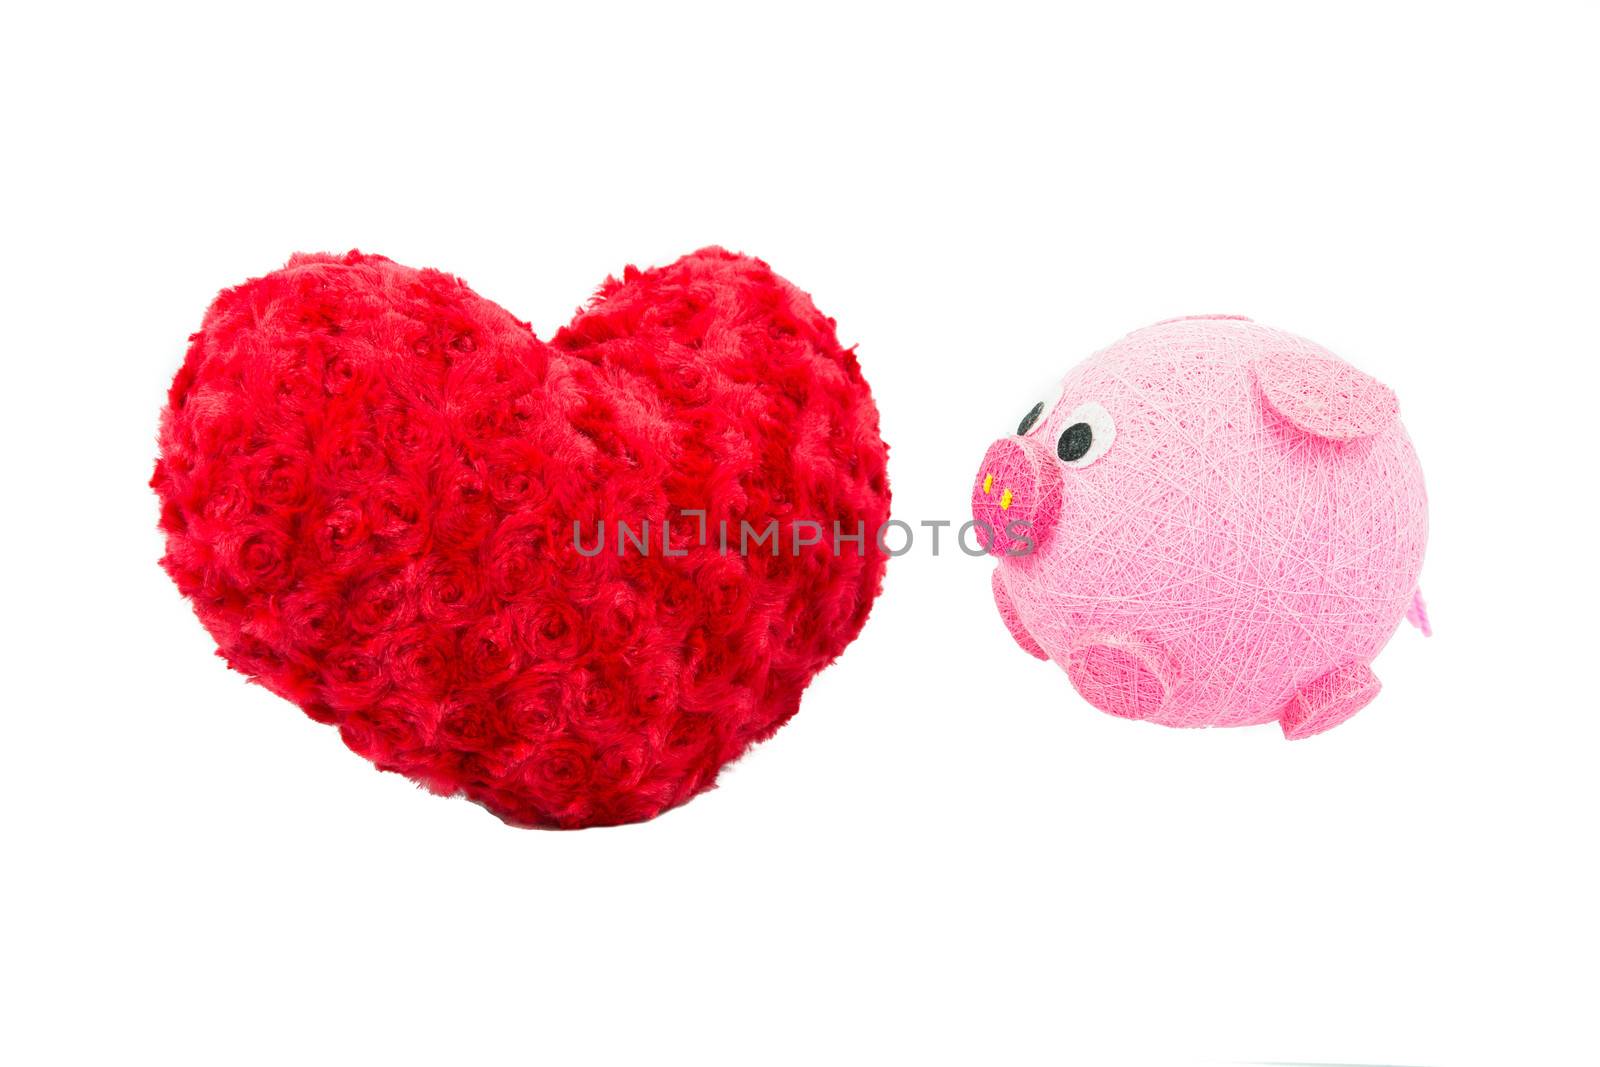 Valentine Heart Made Out of Pillow Roses and Pink Pig on White Background